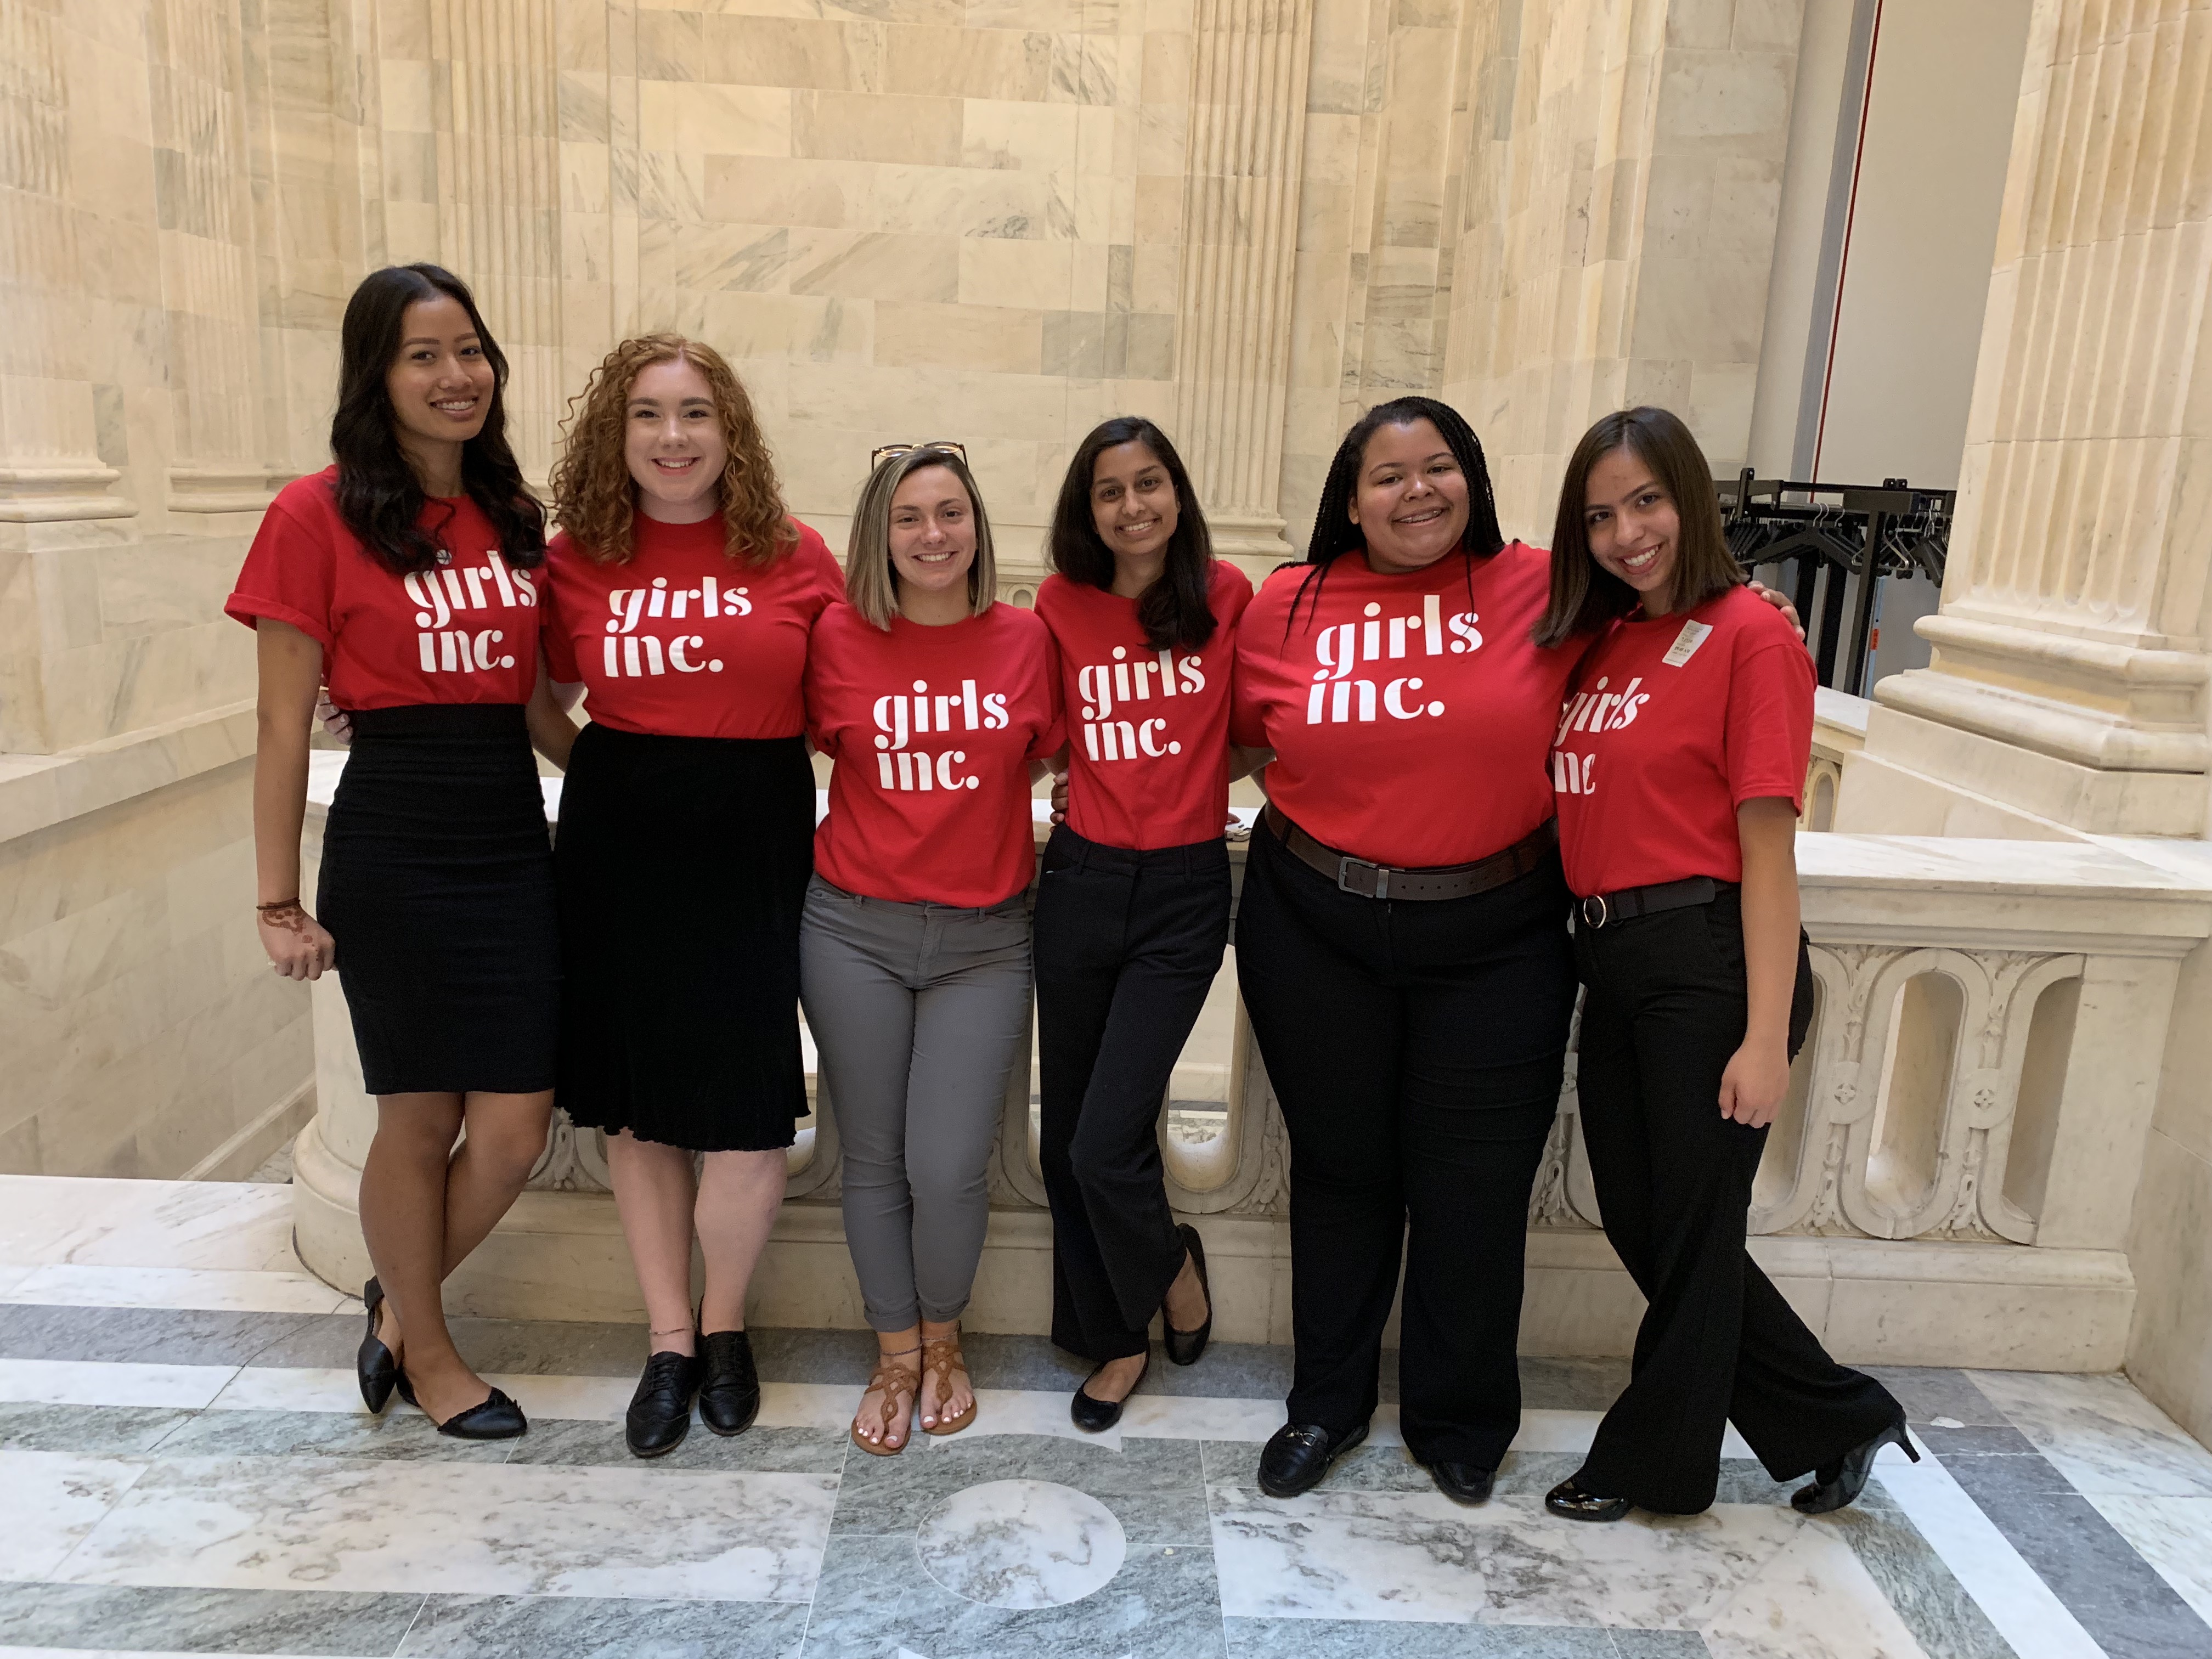 Girls head to the Hill to make their voices heard